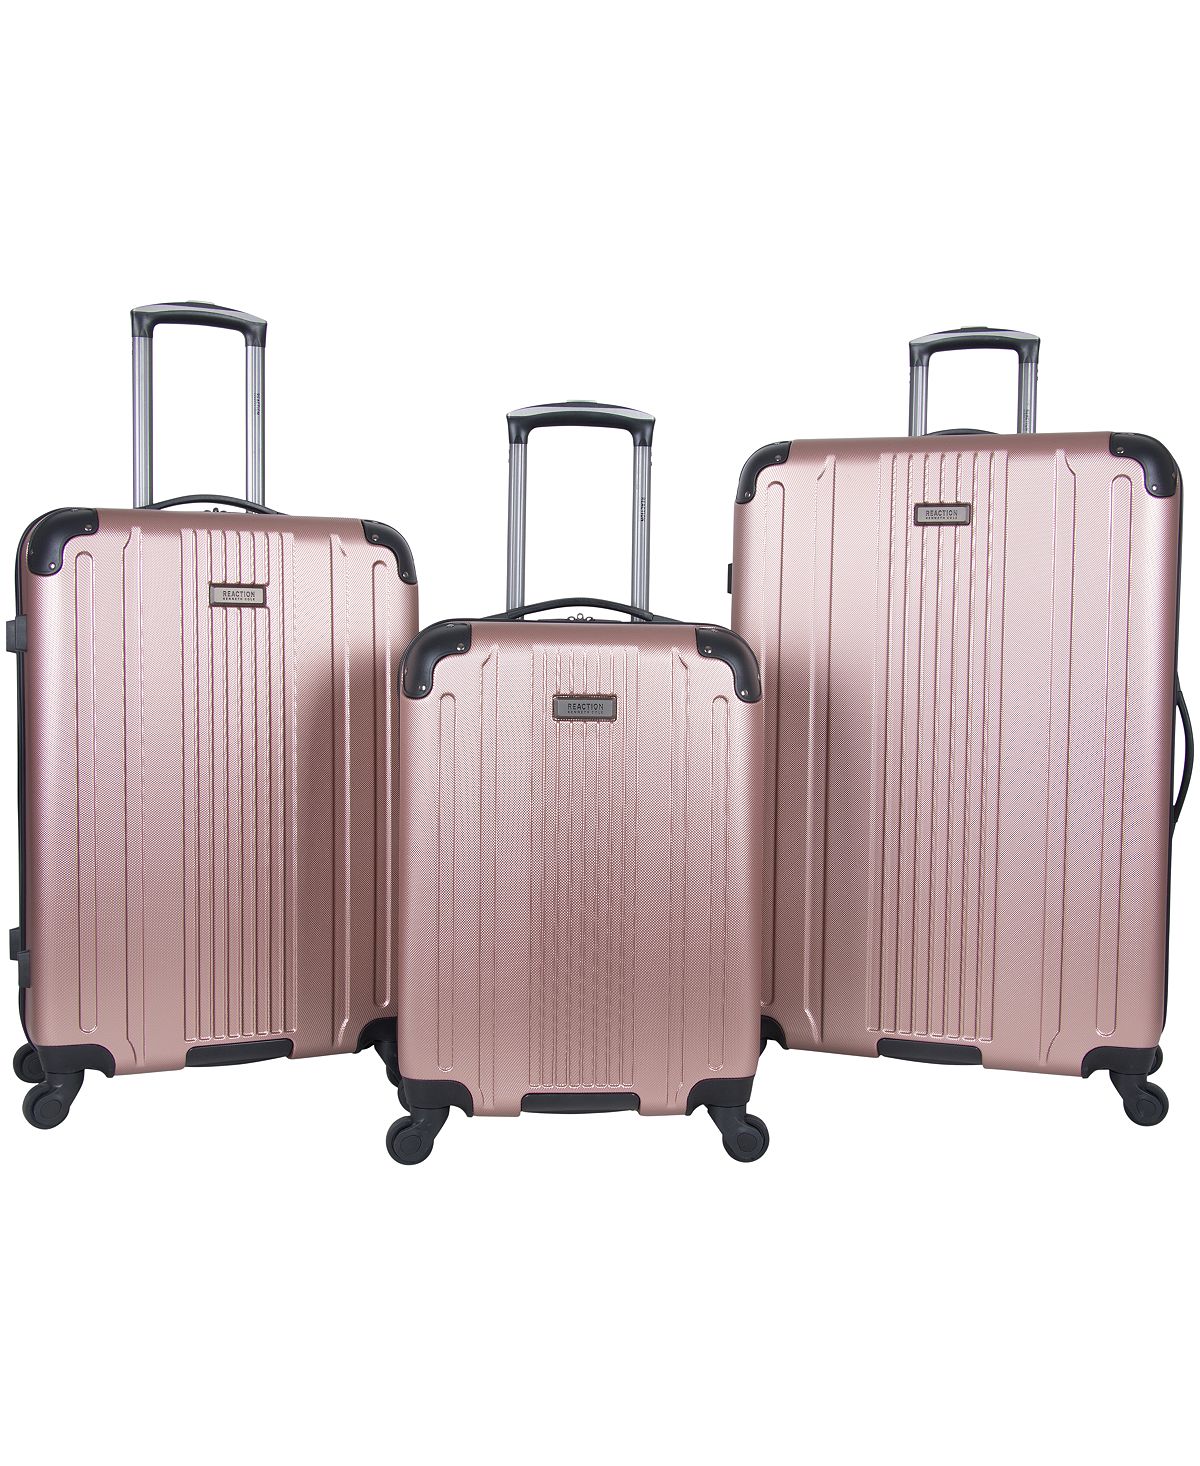 Kenneth Cole Reaction - South Street 3-Pc. Hardside Spinner Luggage Set